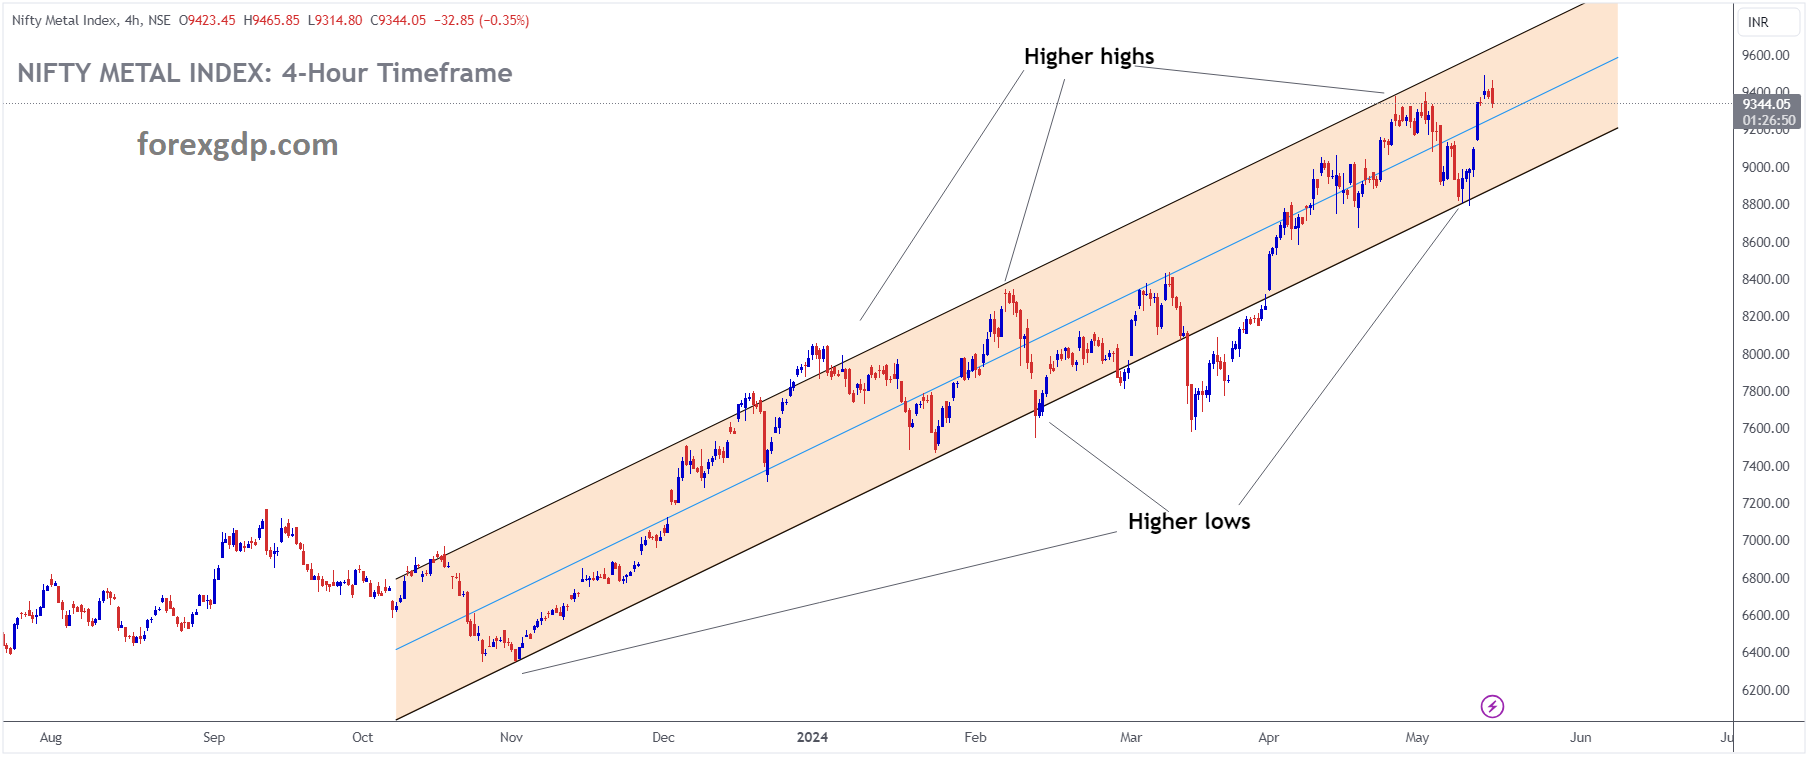 Nifty Metal Index Market price is moving in Ascending channel and market has rebounded from the higher low area of the channel